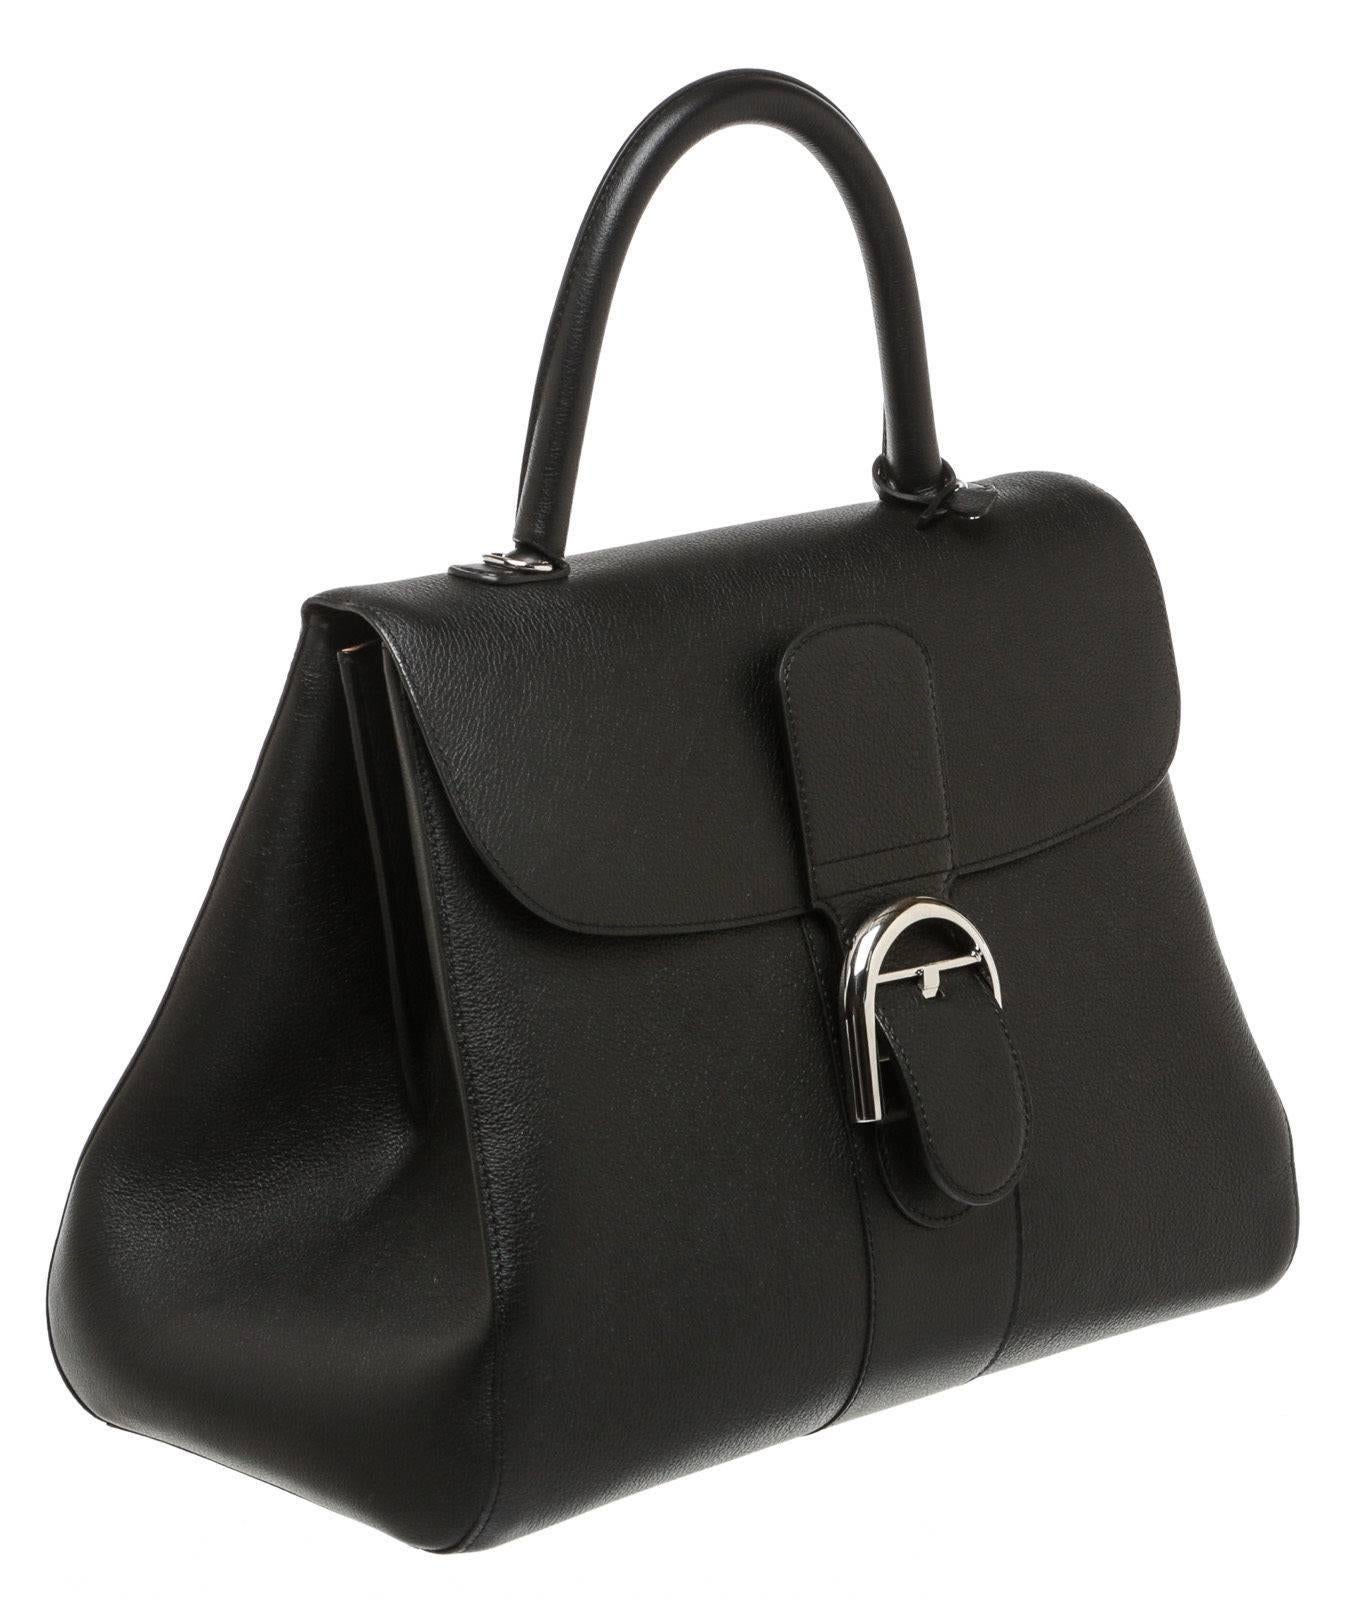 Designer: Other
Type: 
Handbag
Condition: 
Exterior: Pre-owned in very good condition - minor wear
Interior: Pre-owned in very good condition - minor wear
Color: 
Black
Material: 
Leather
Dimensions: 
13.25